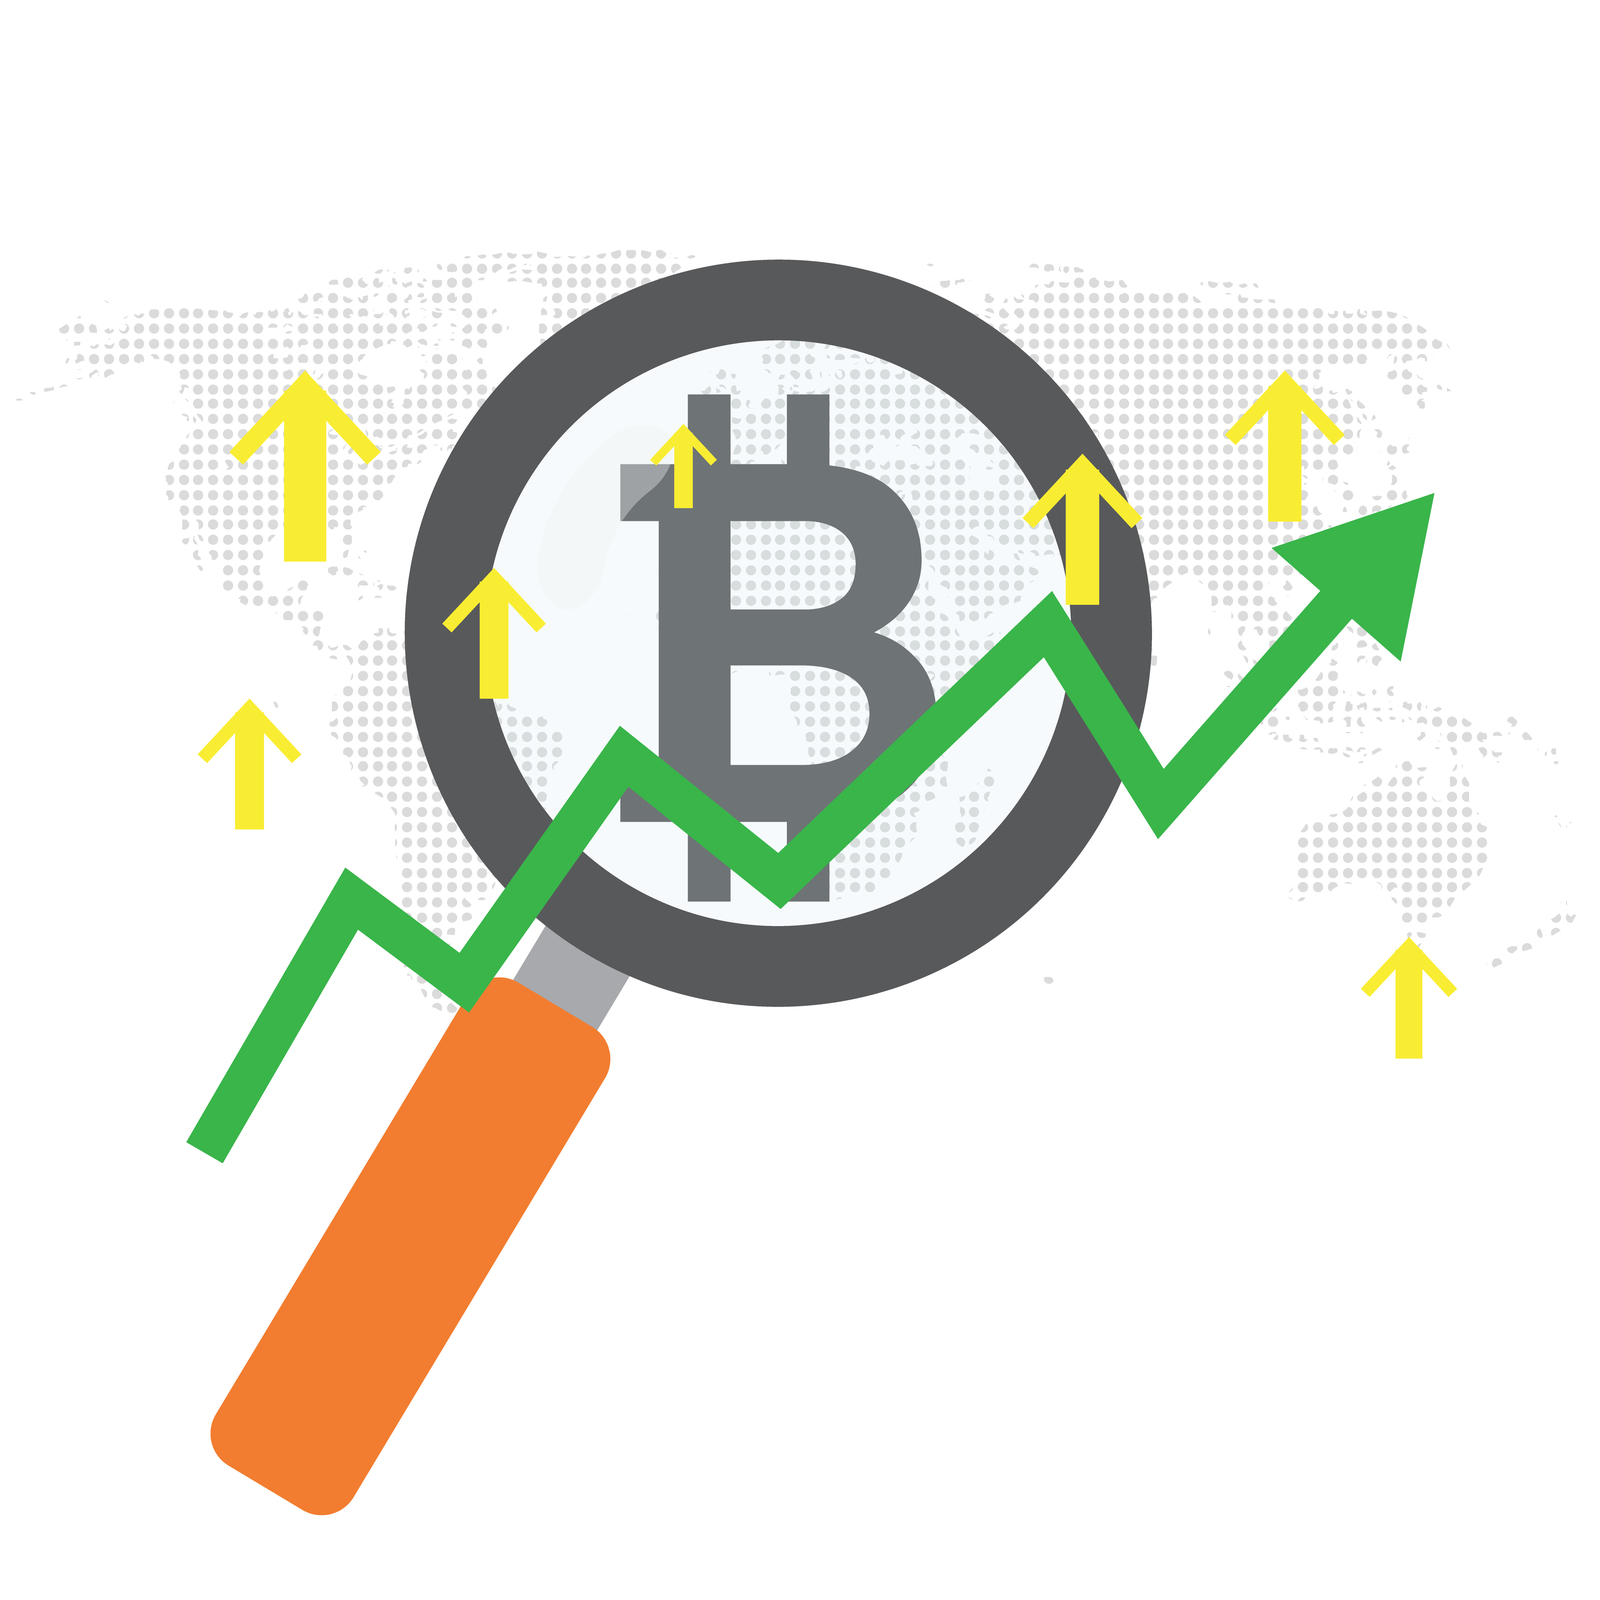 Google Search Volume for Bitcoin Keywords Increased by as Much as 1000% During 2017